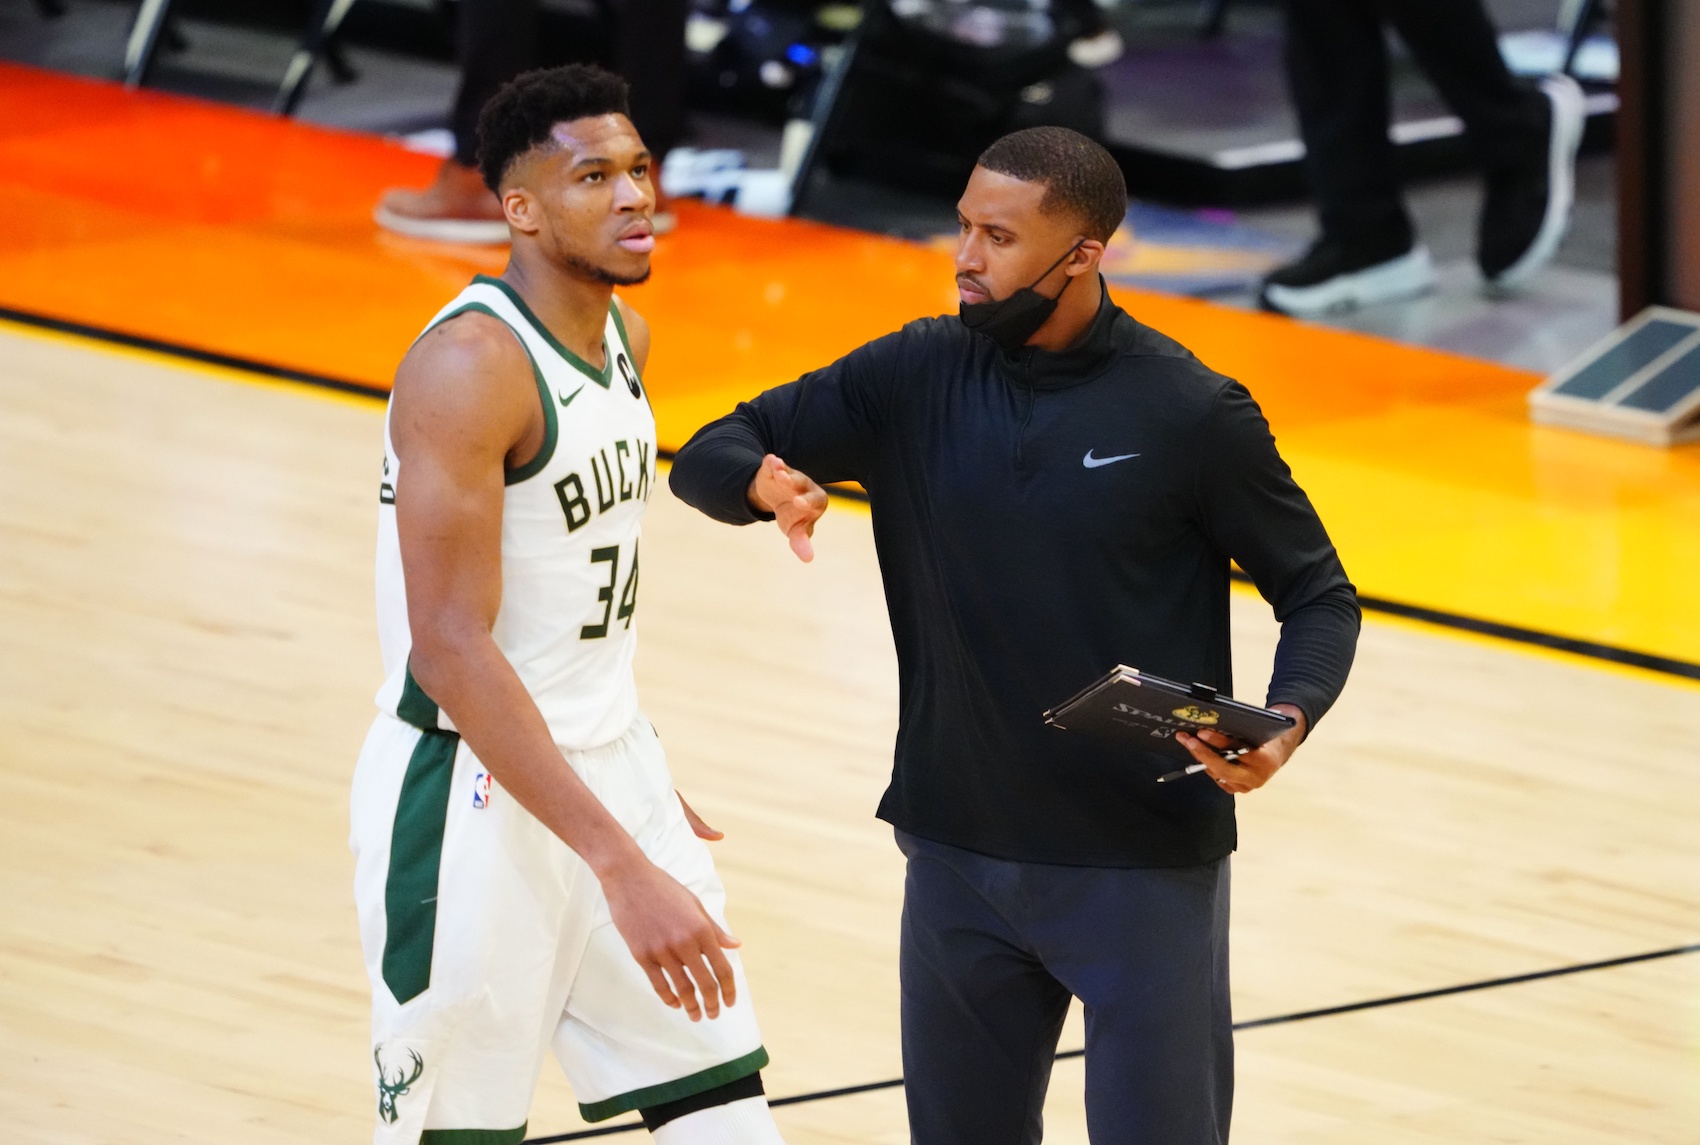 Jul 6, 2021; Phoenix, Arizona, USA; Milwaukee Bucks forward Giannis Antetokounmpo (34) with assistant coach Charles Lee against the Phoenix Suns in game one of the 2021NBA Finals at Phoenix Suns Arena. Mandatory Credit: Mark J. Rebilas-USA TODAY Sports